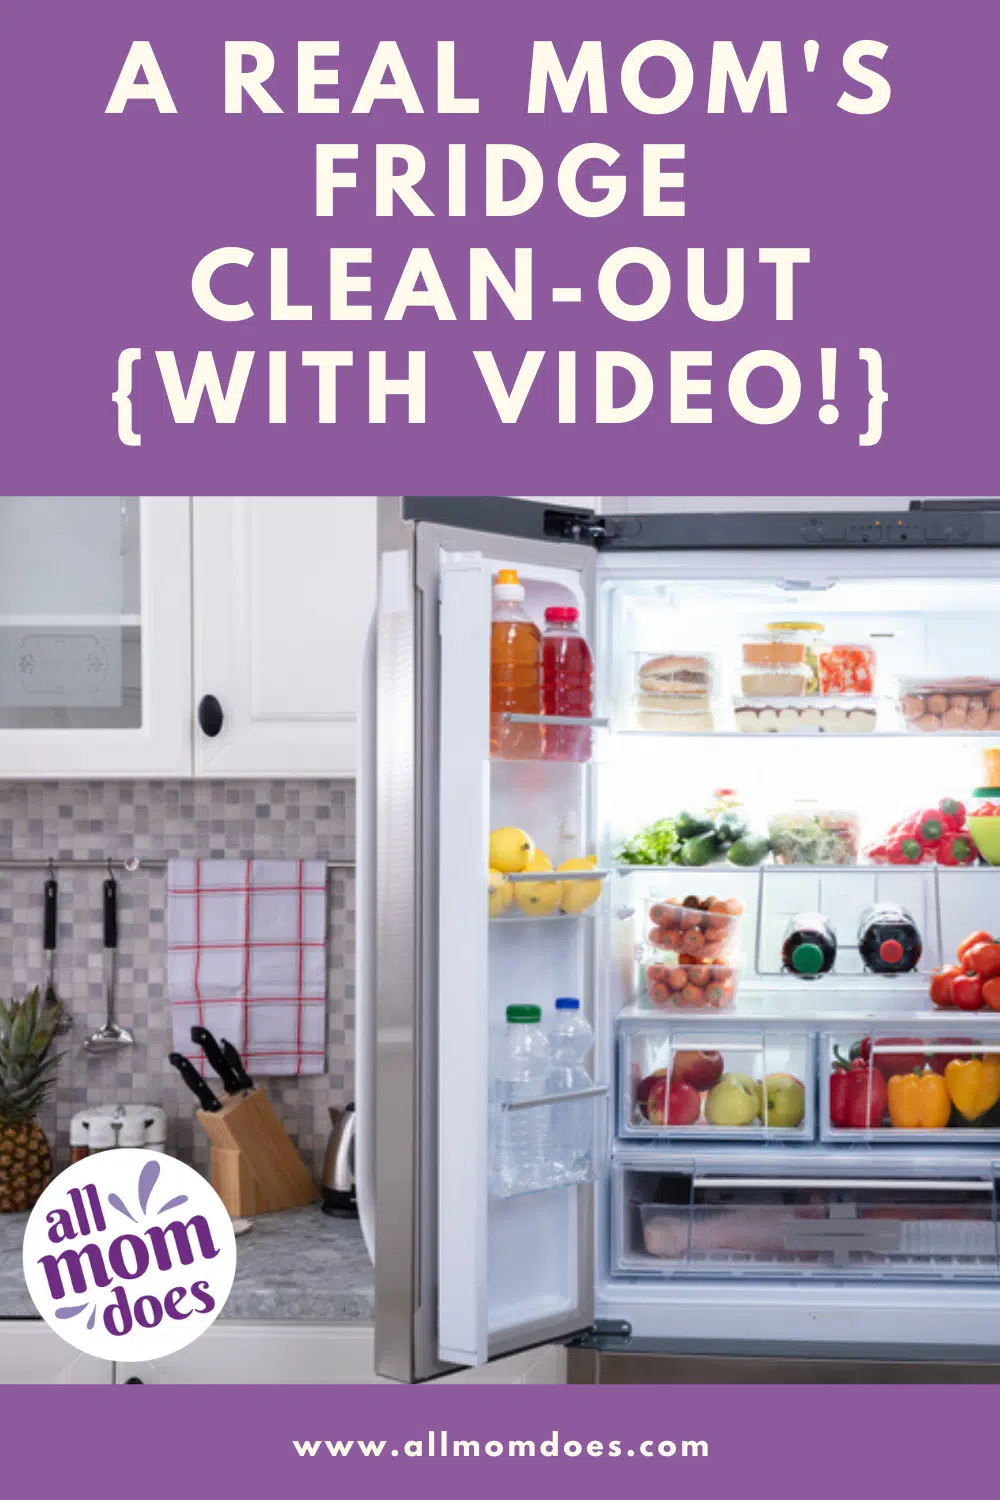 clean and organize refrigerator tips video